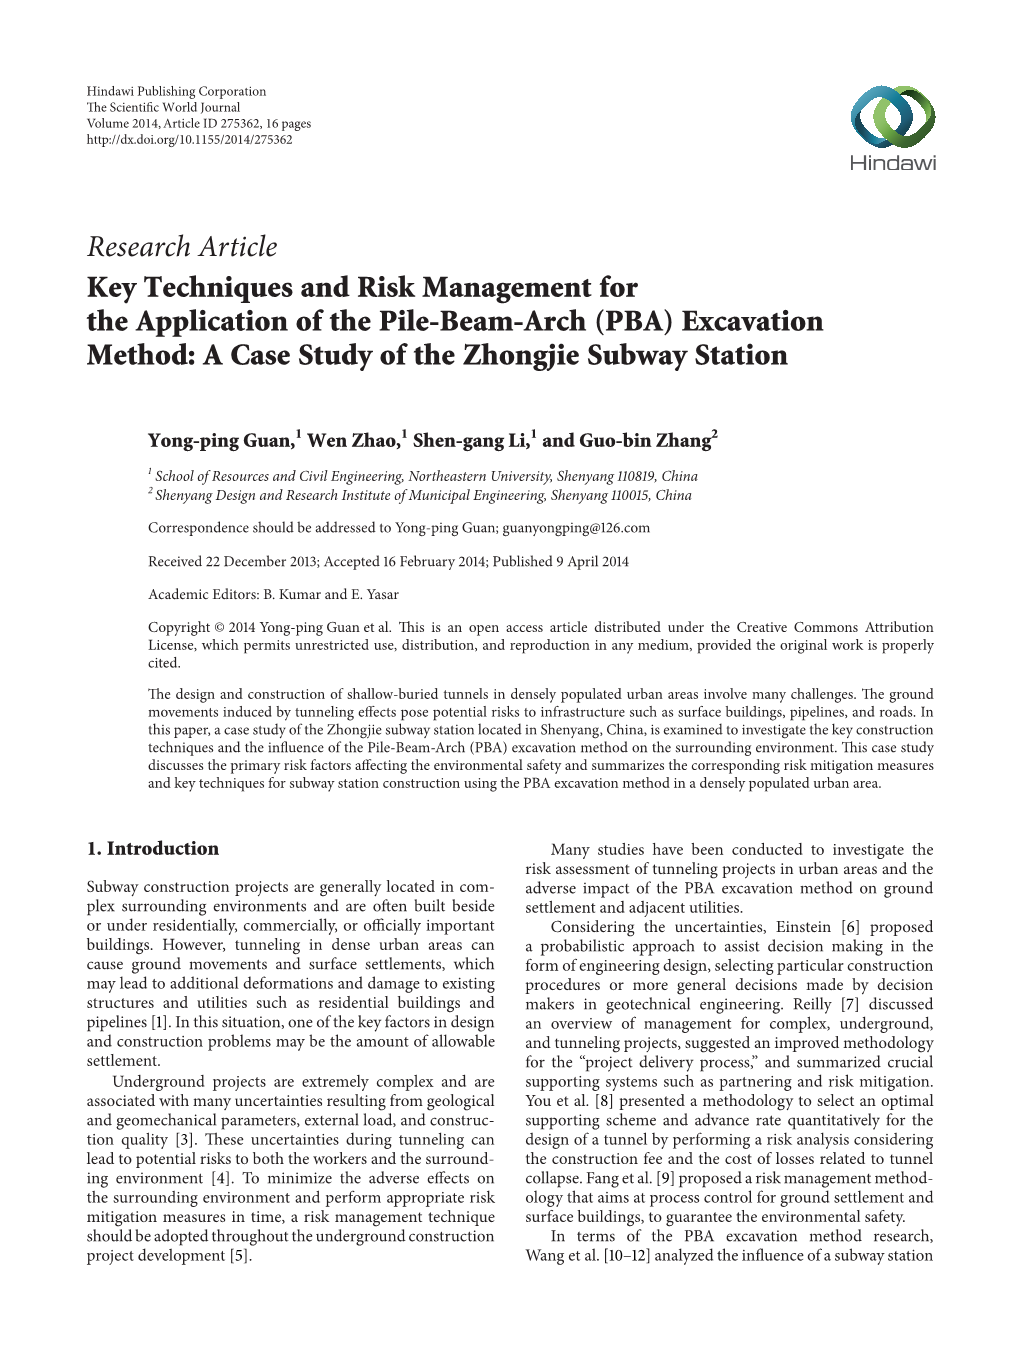 Key Techniques and Risk Management for the Application of the Pile-Beam-Arch (PBA) Excavation Method: a Case Study of the Zhongjie Subway Station